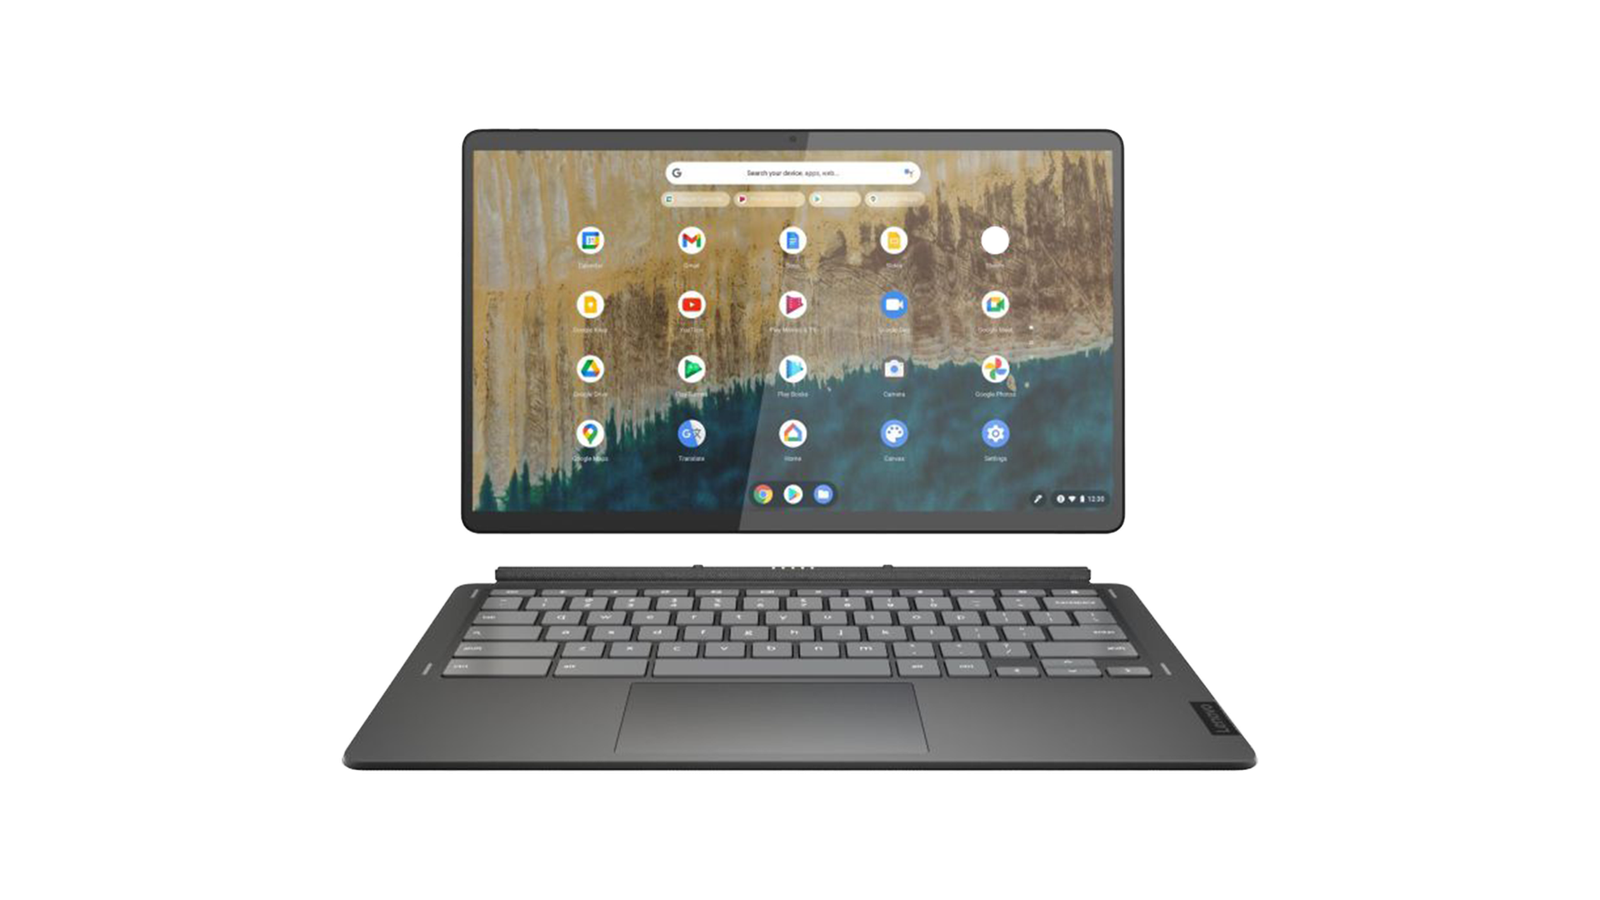 Lenovo IdeaPad Duet Chromebook 10.1 - The ideal tablet for students who don't require all of the available apps